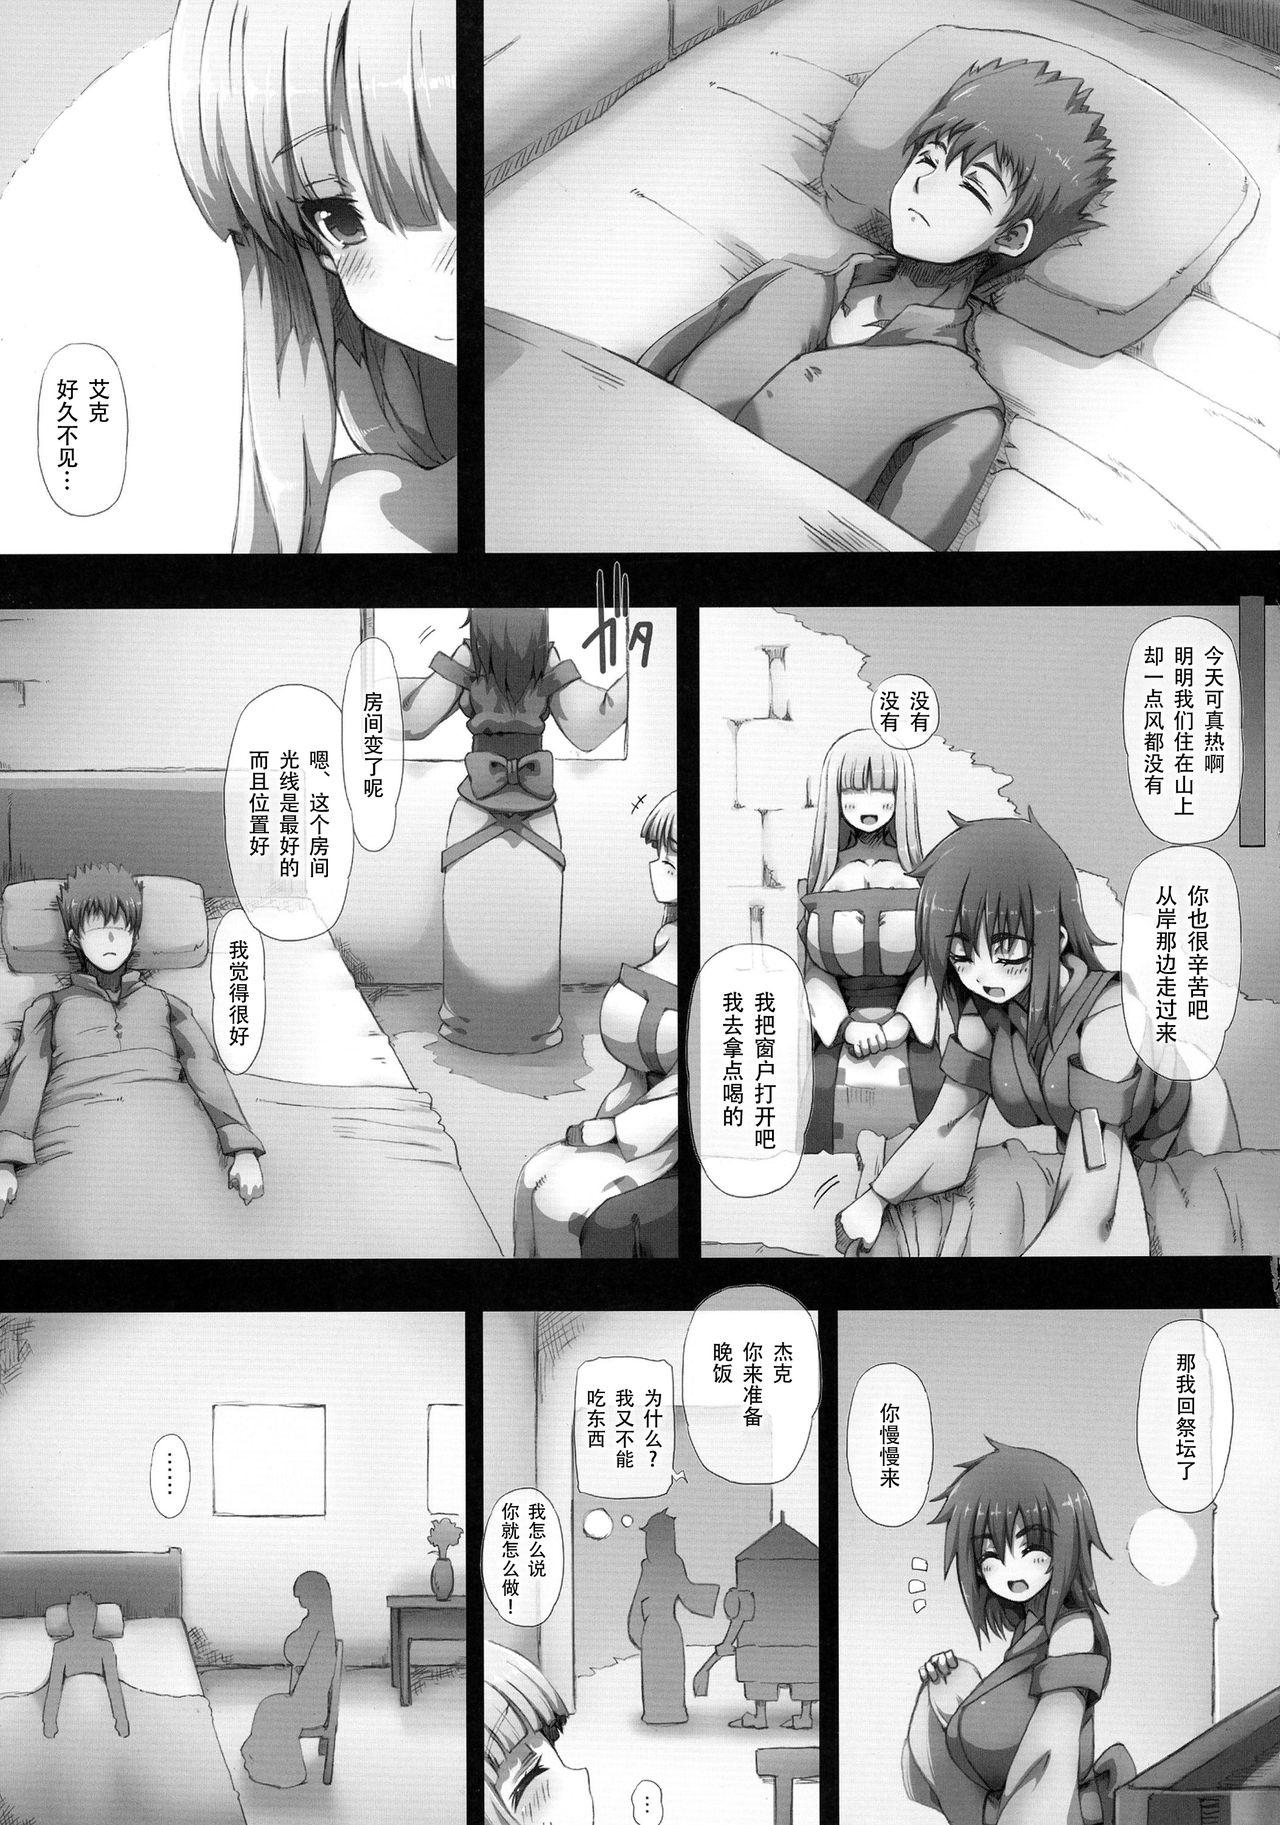 Fuck [GREAT Acta (tokyo)] Lieza Origin (Arc The Lad)[Chinese]【不可视汉化】 - Arc the lad Chunky - Page 10